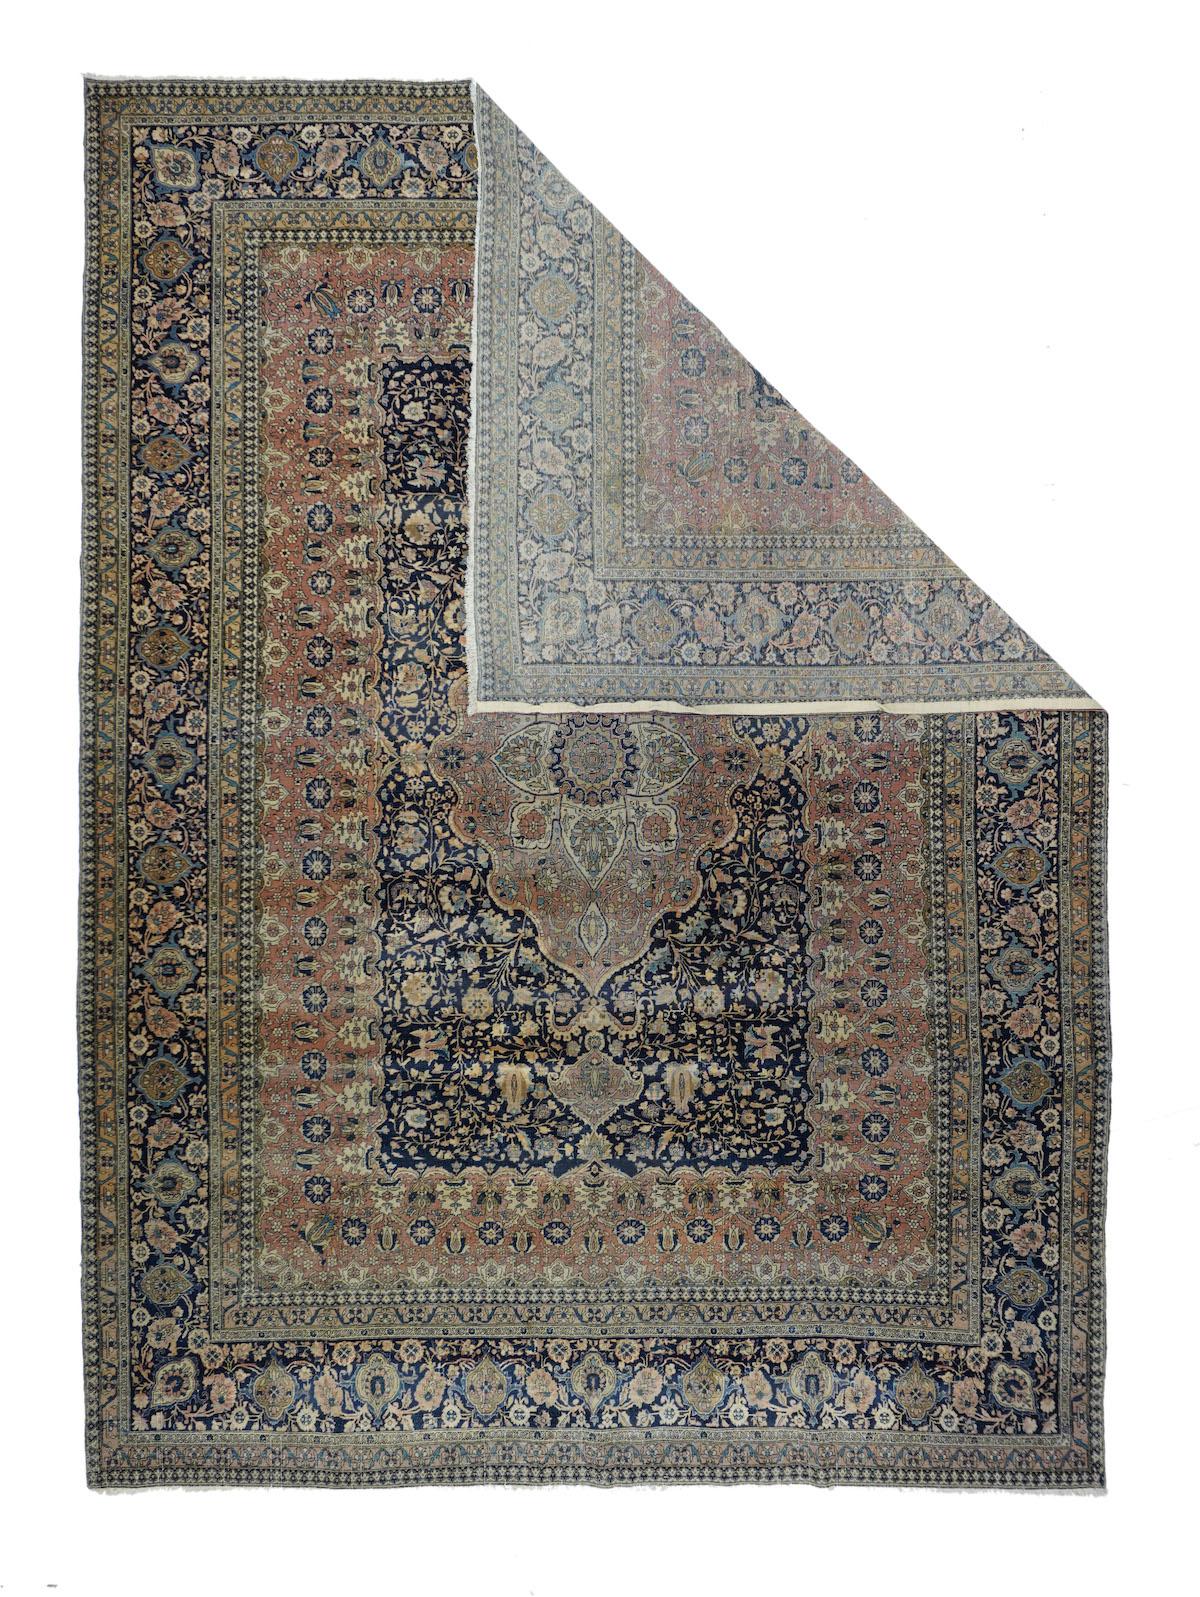 Antique Mohtasham Kashan rug 7'8'' x 10'4''. This very fully-patterned, finely woven NW Persian carpet is certainly attributable to the highly desirable 